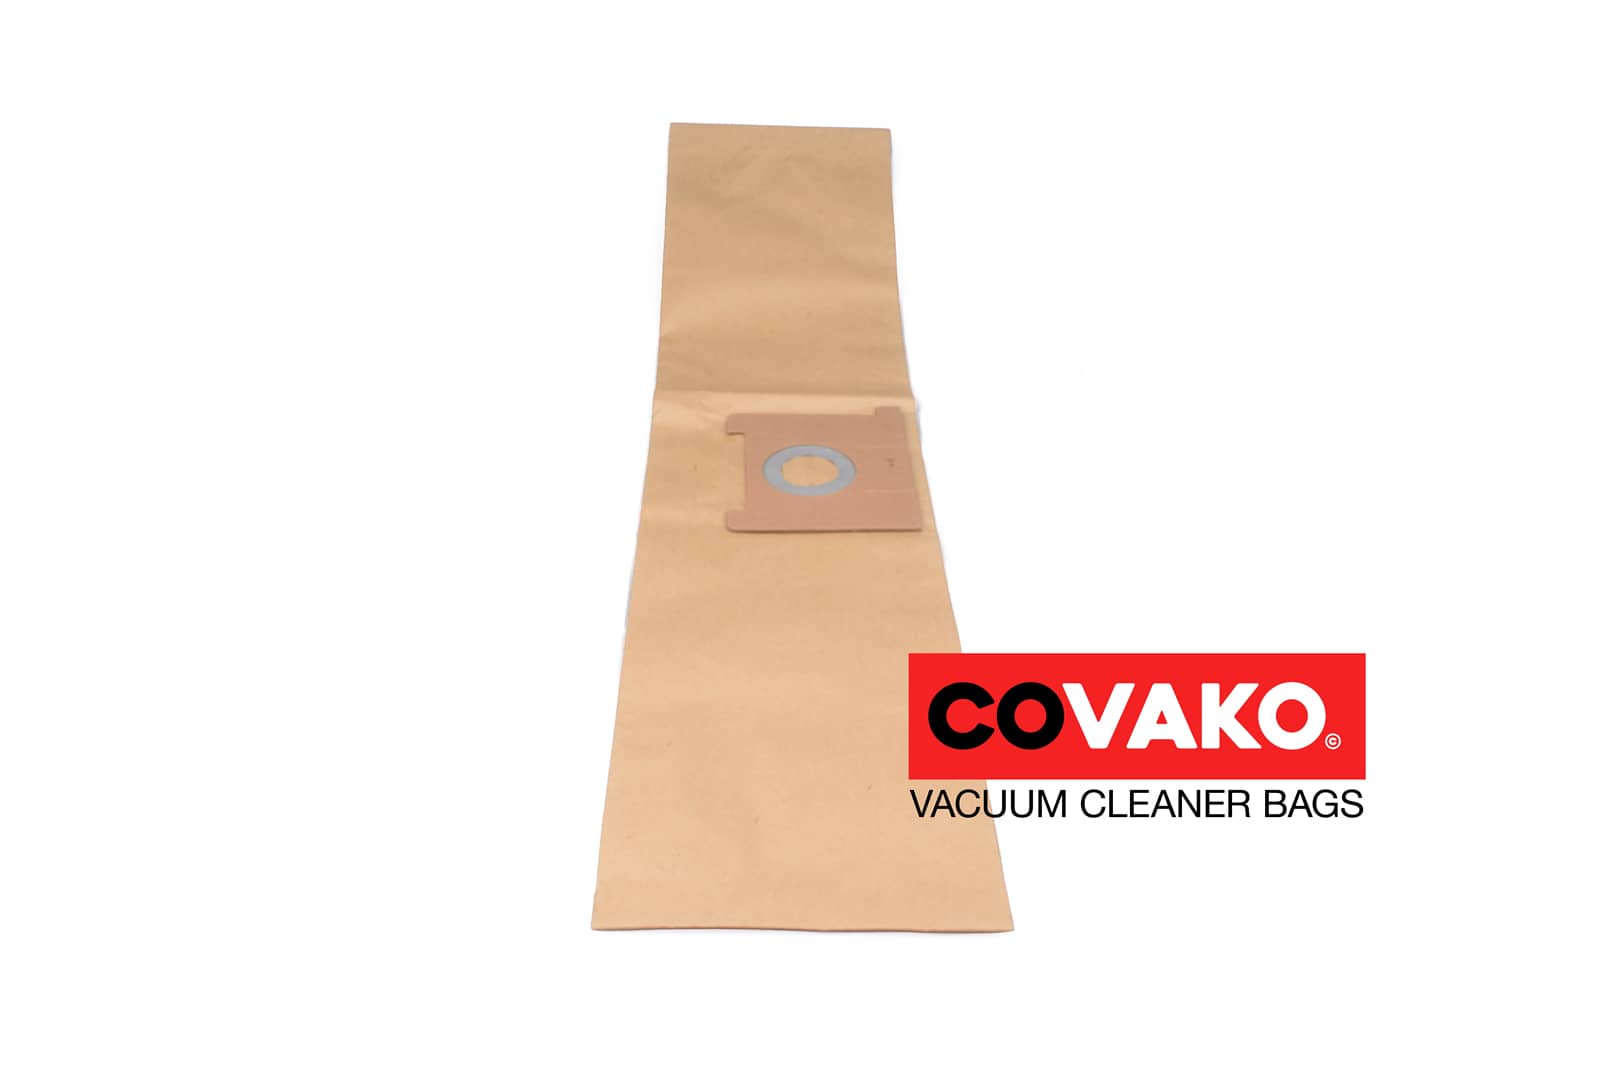 Oehme Otto C 09 / Paper - Oehme Otto vacuum cleaner bags